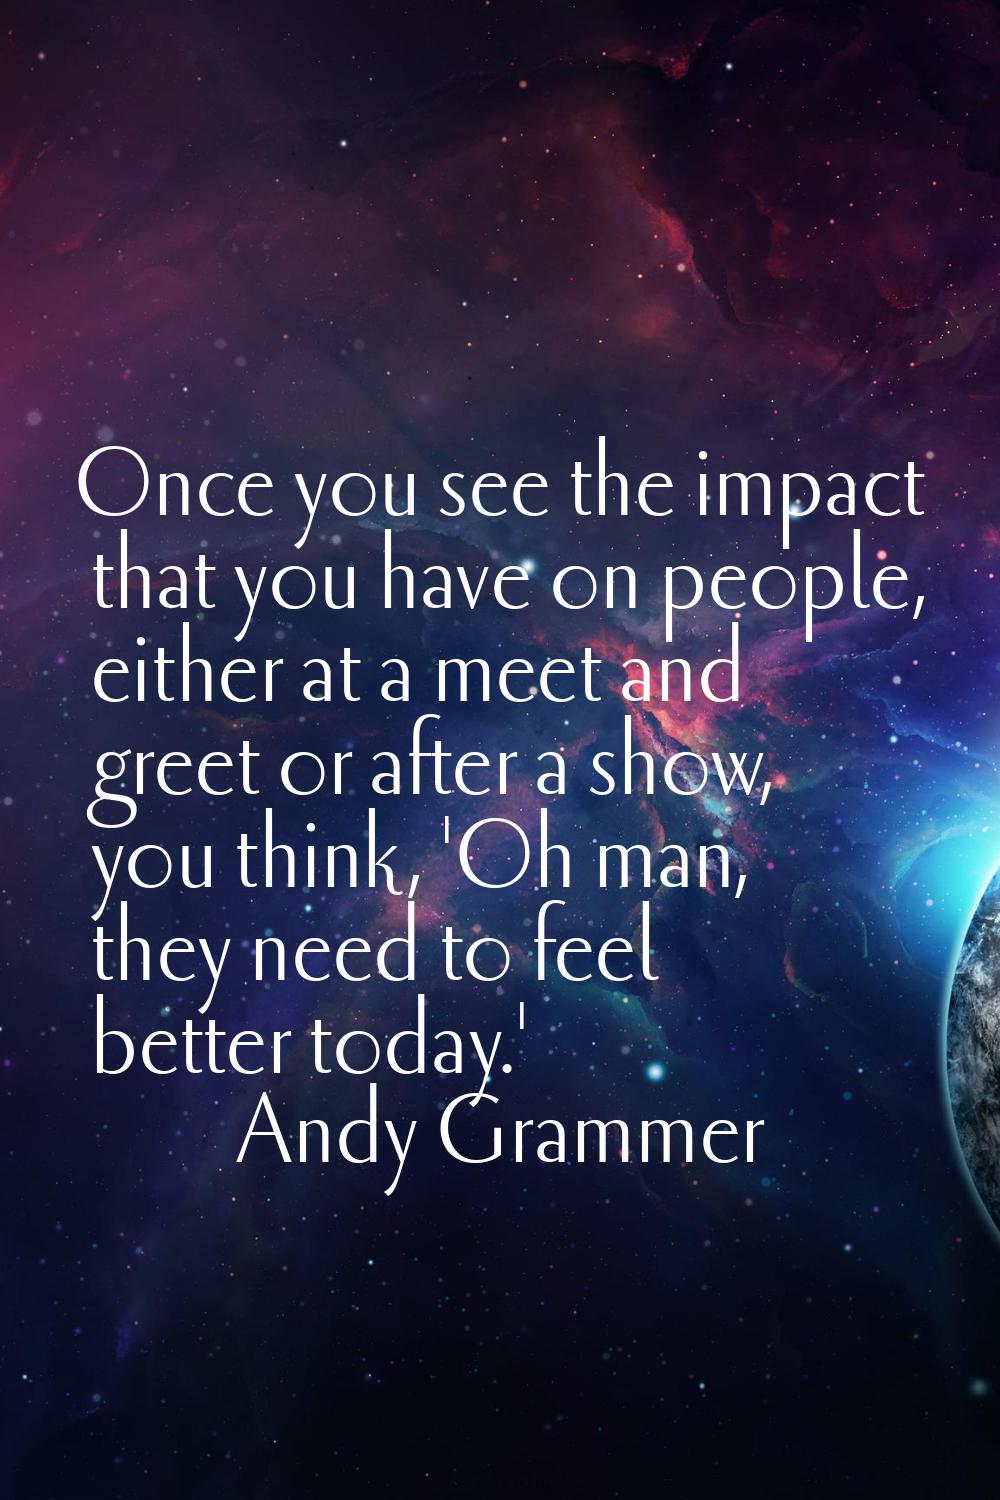 Once you see the impact that you have on people, either at a meet and greet or after a show, you th